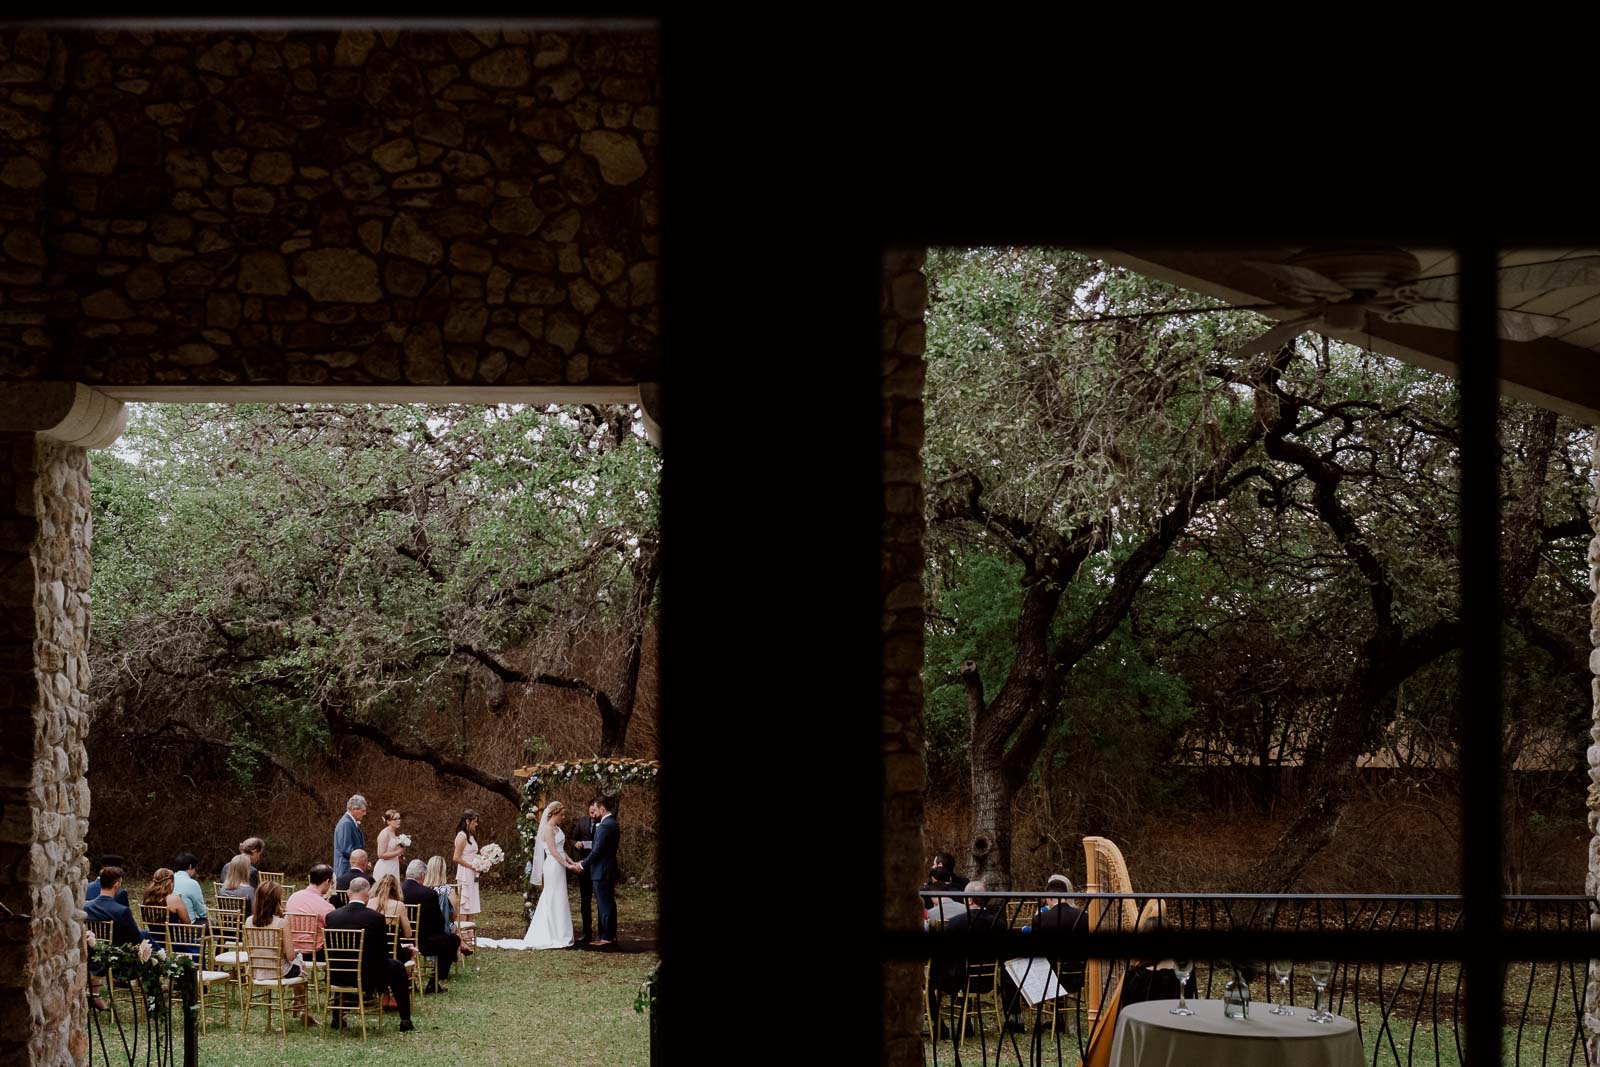 A photograph taken from the main building of the veranda during the ceremony looking out on the lawn with the hope is in the right and the couple in the middle